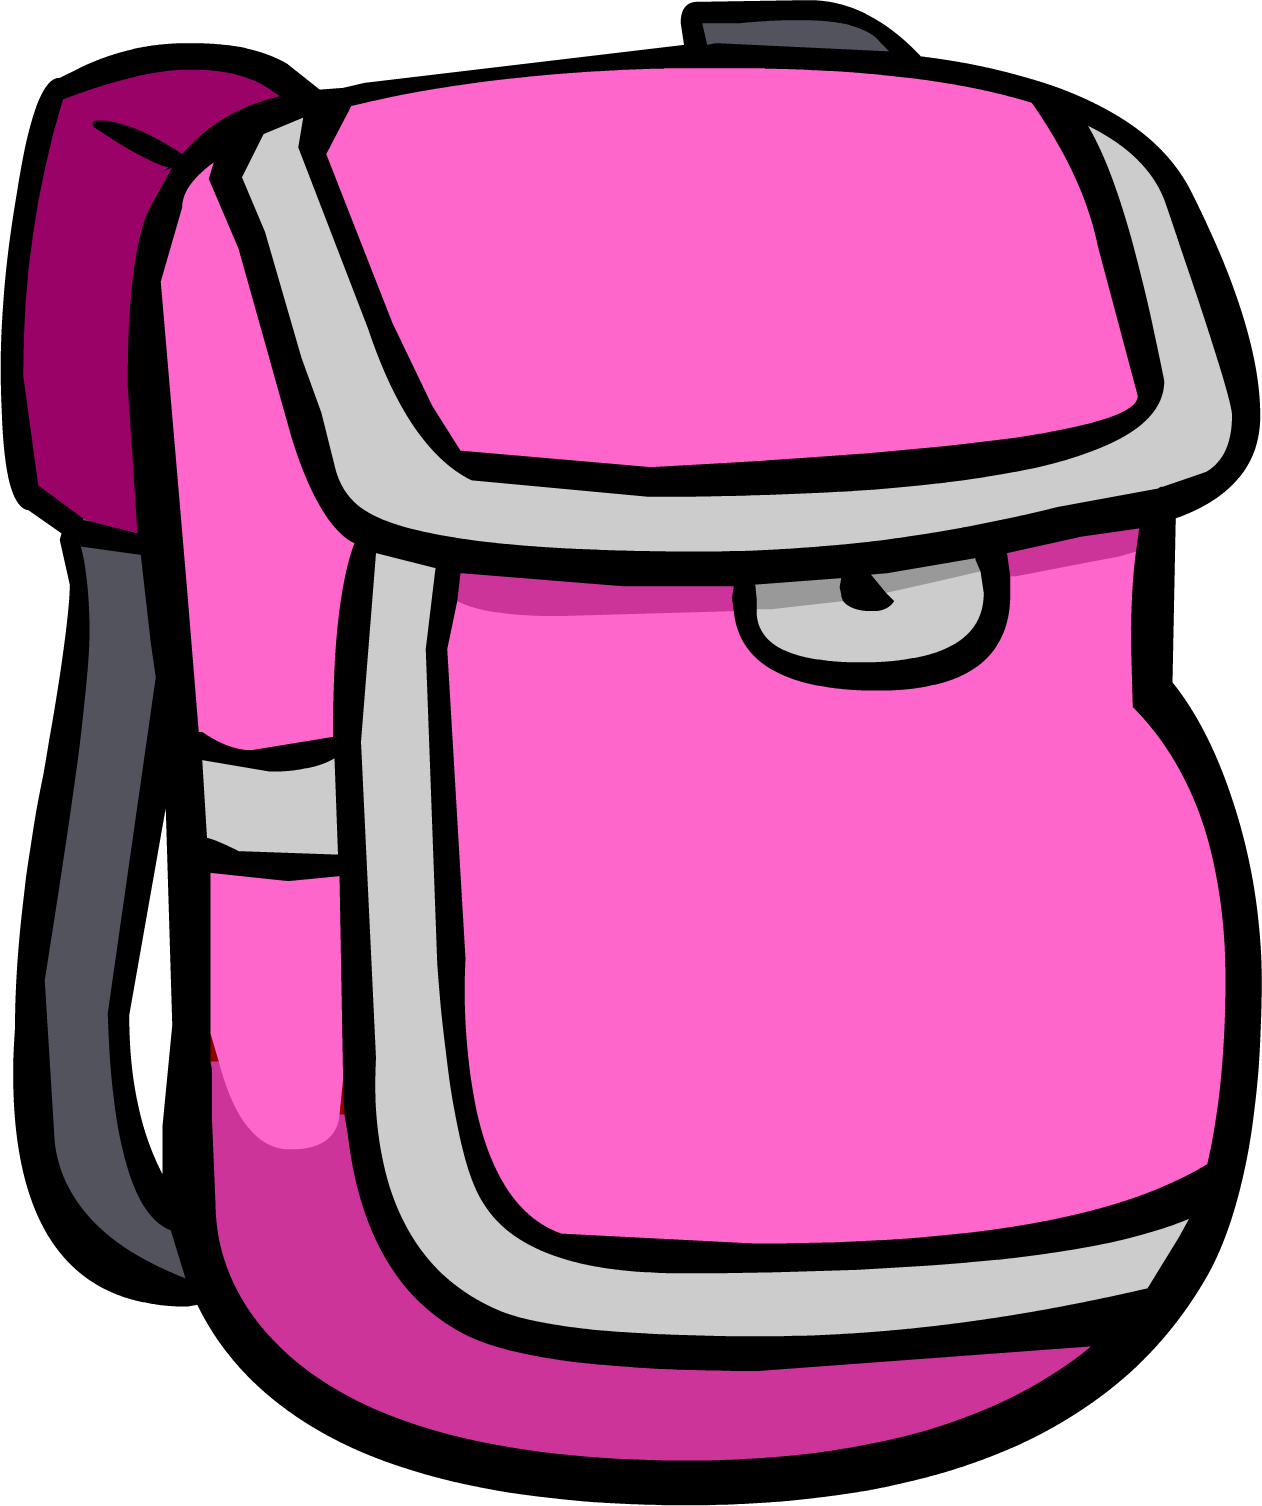 Clipart backpack pink.